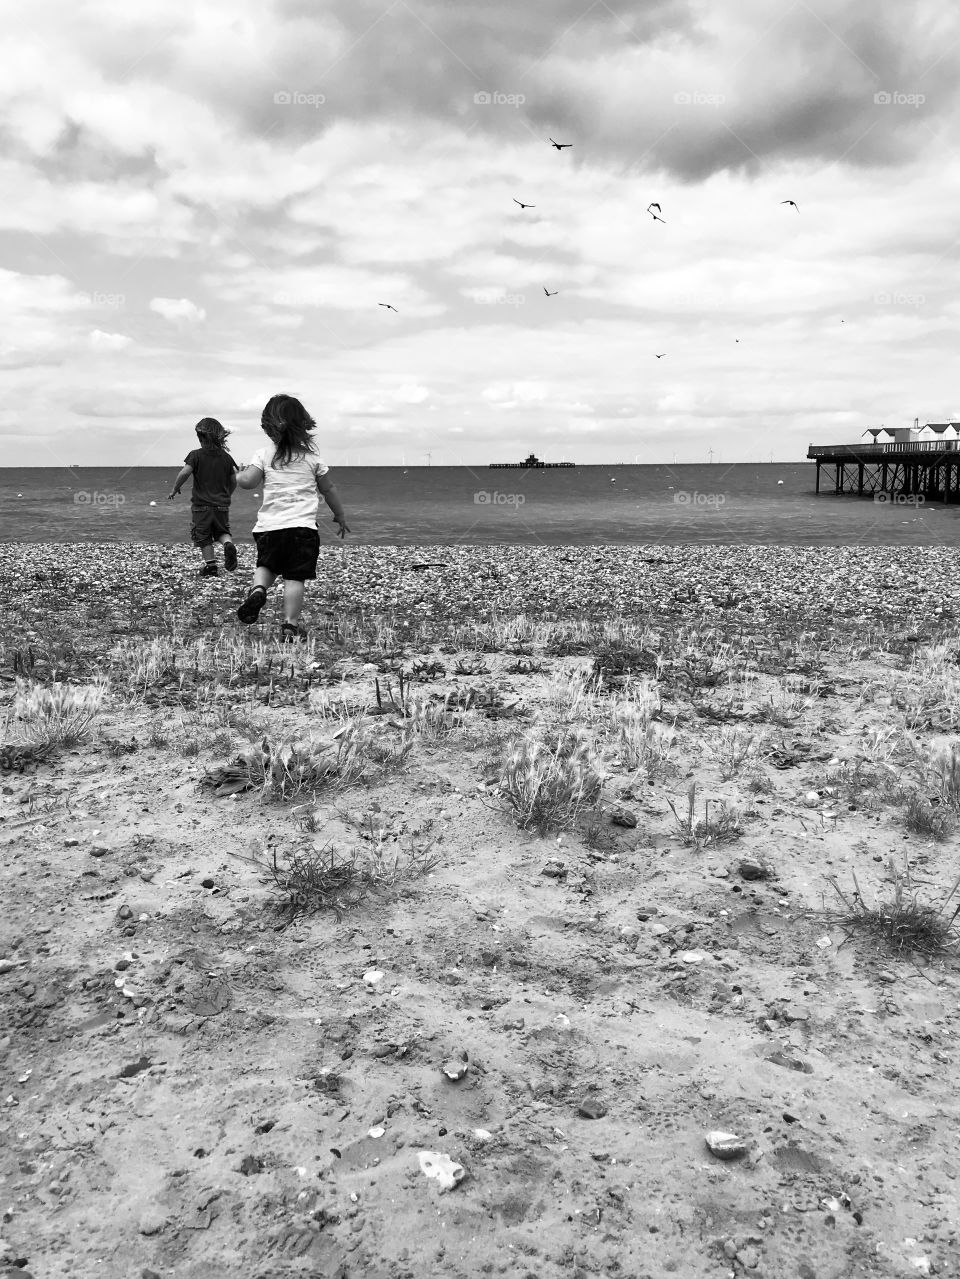 Siblings running towards the shore on pebbled beach in monochrome